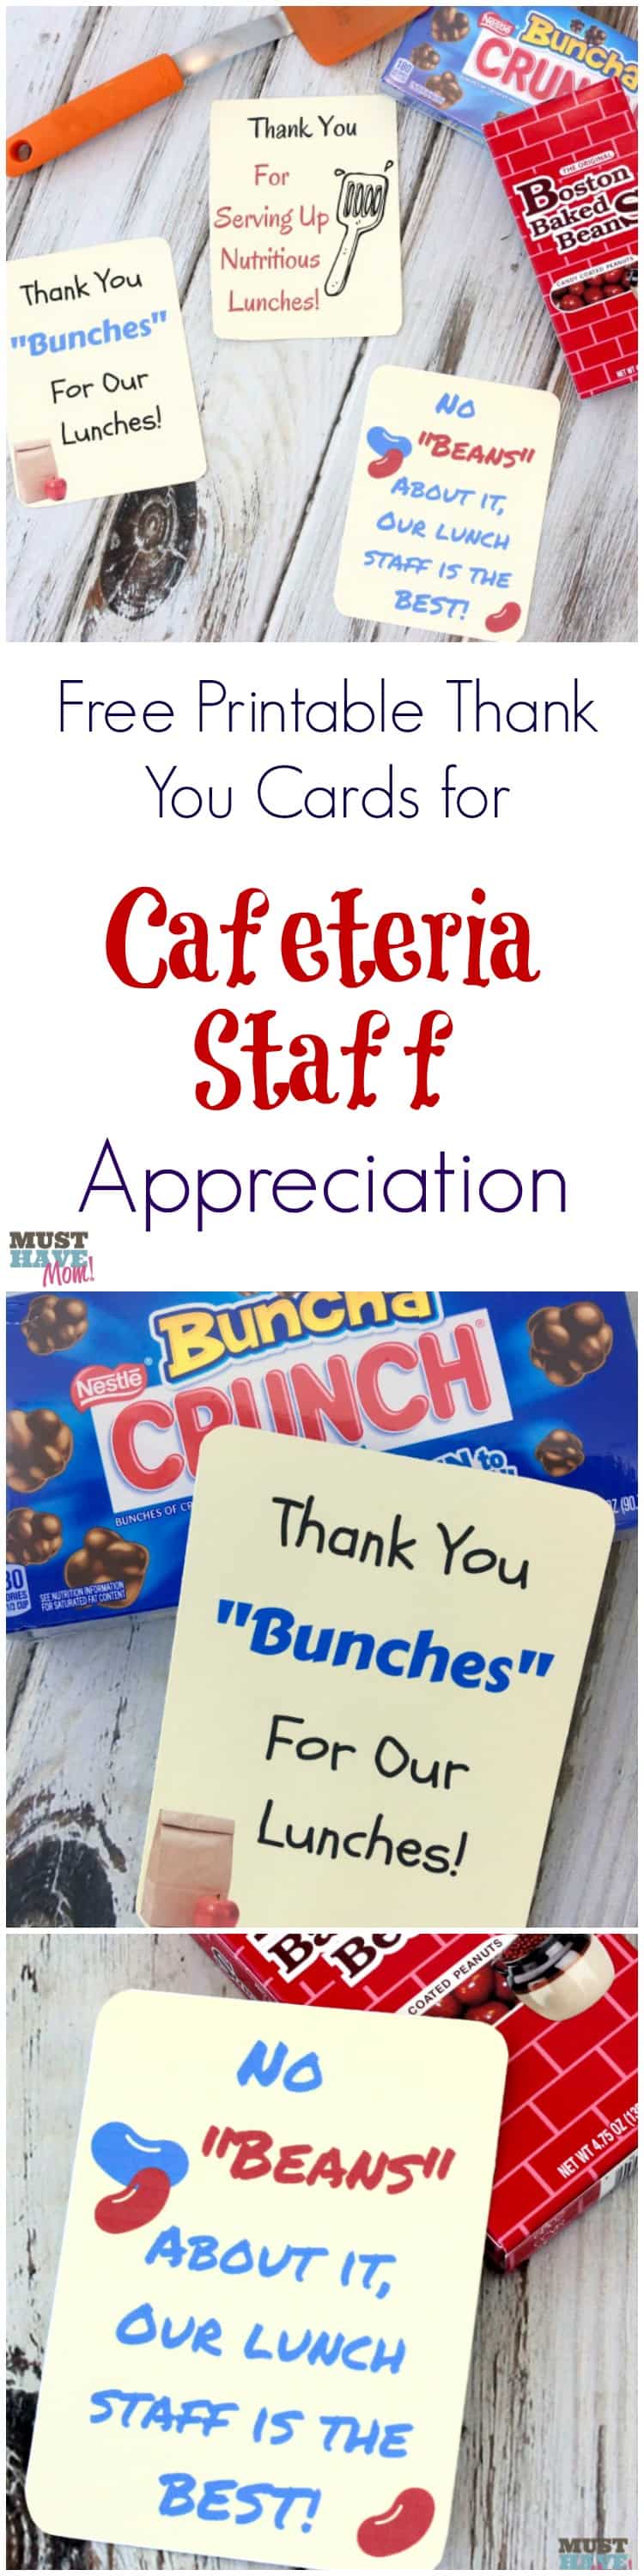 Free printable thank you cards for cafeteria staff appreciation! Celebrate school lunch hero day and thank those that provided school lunches for your child each day!